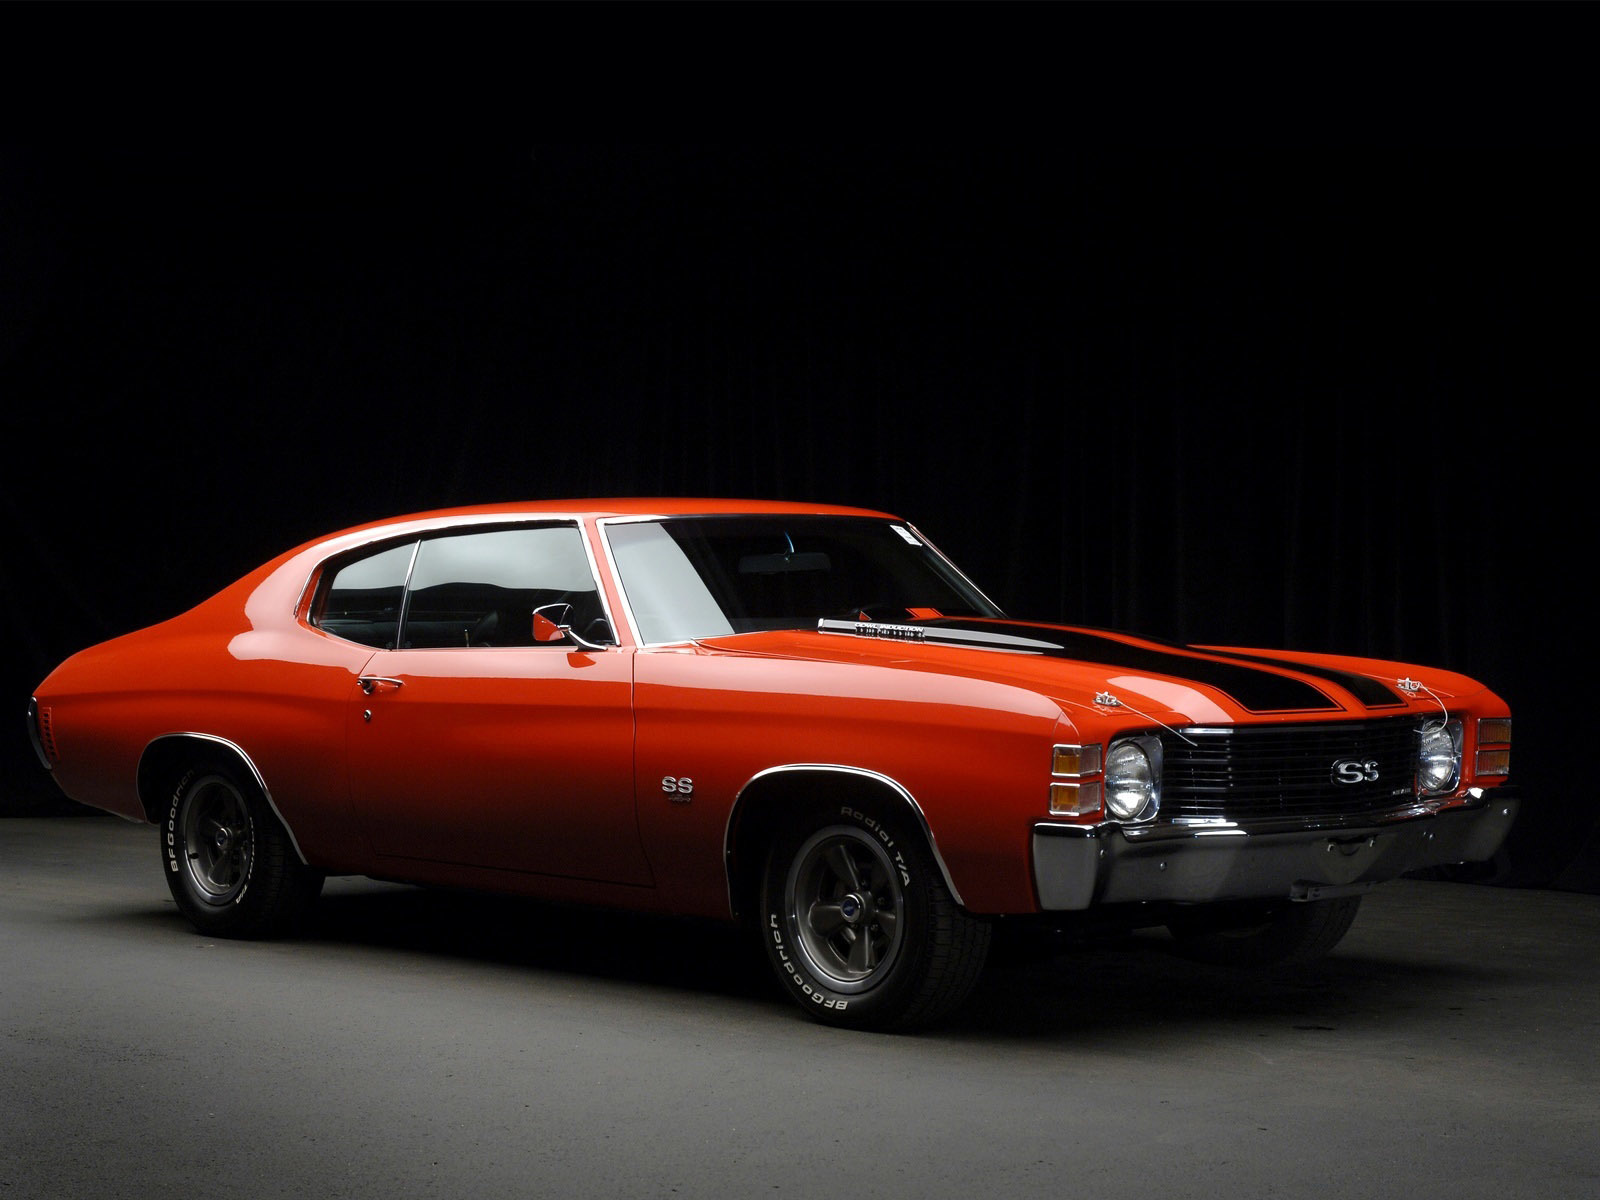  Cars Wallpaper on Wallpapers On Muscle Cars Chevrolet Chevelle Ss Hd Wallpaper Cars